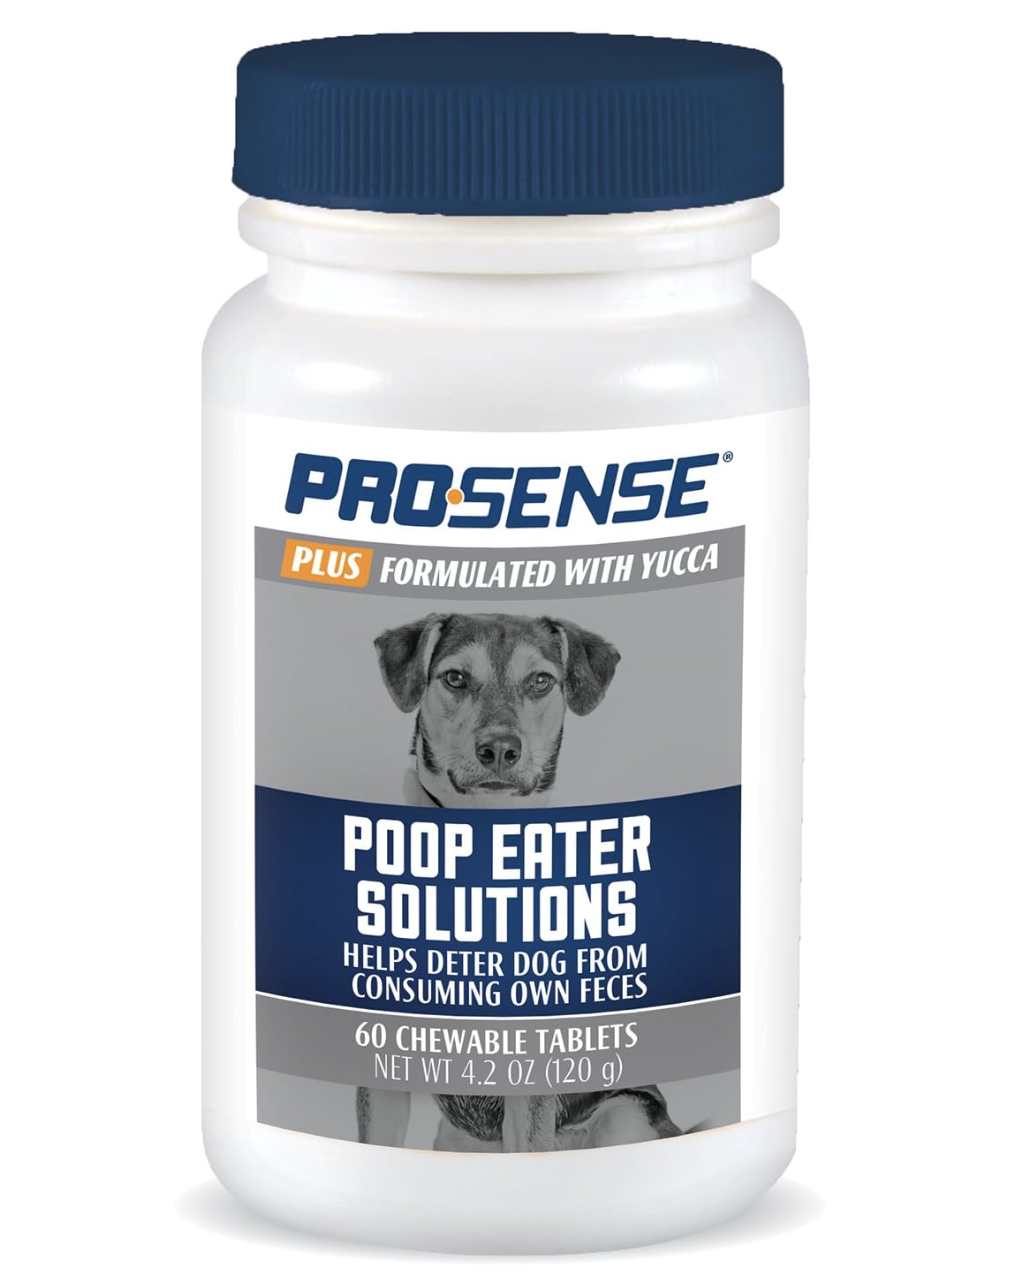 8. Pro-Sense P-87077 Poop Eater Solutions for Dogs